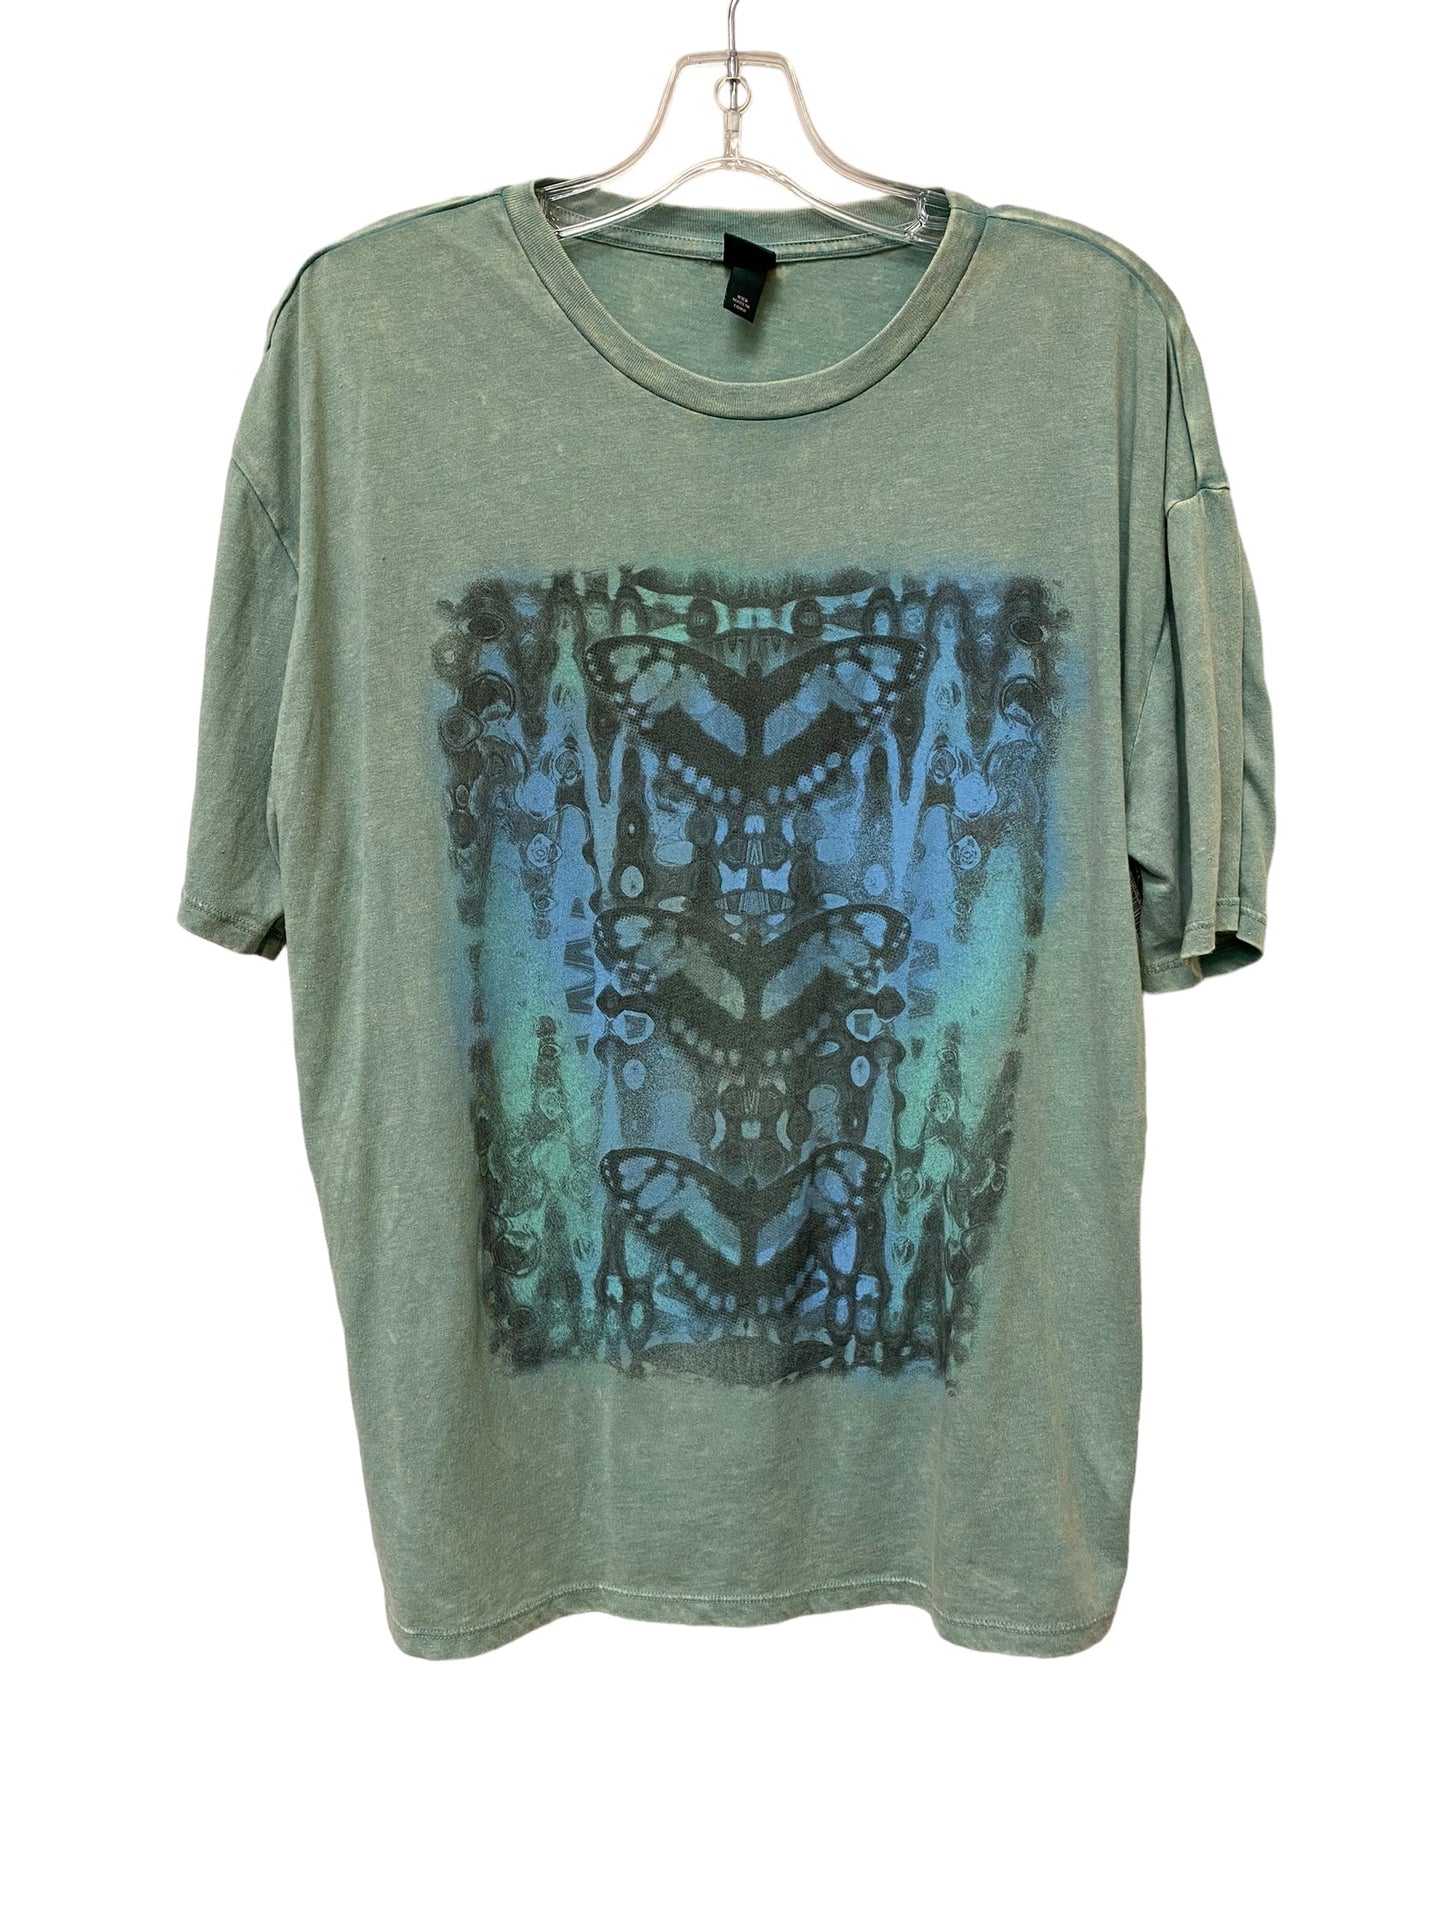 Teal Top Short Sleeve Wild Fable, Size Xxs